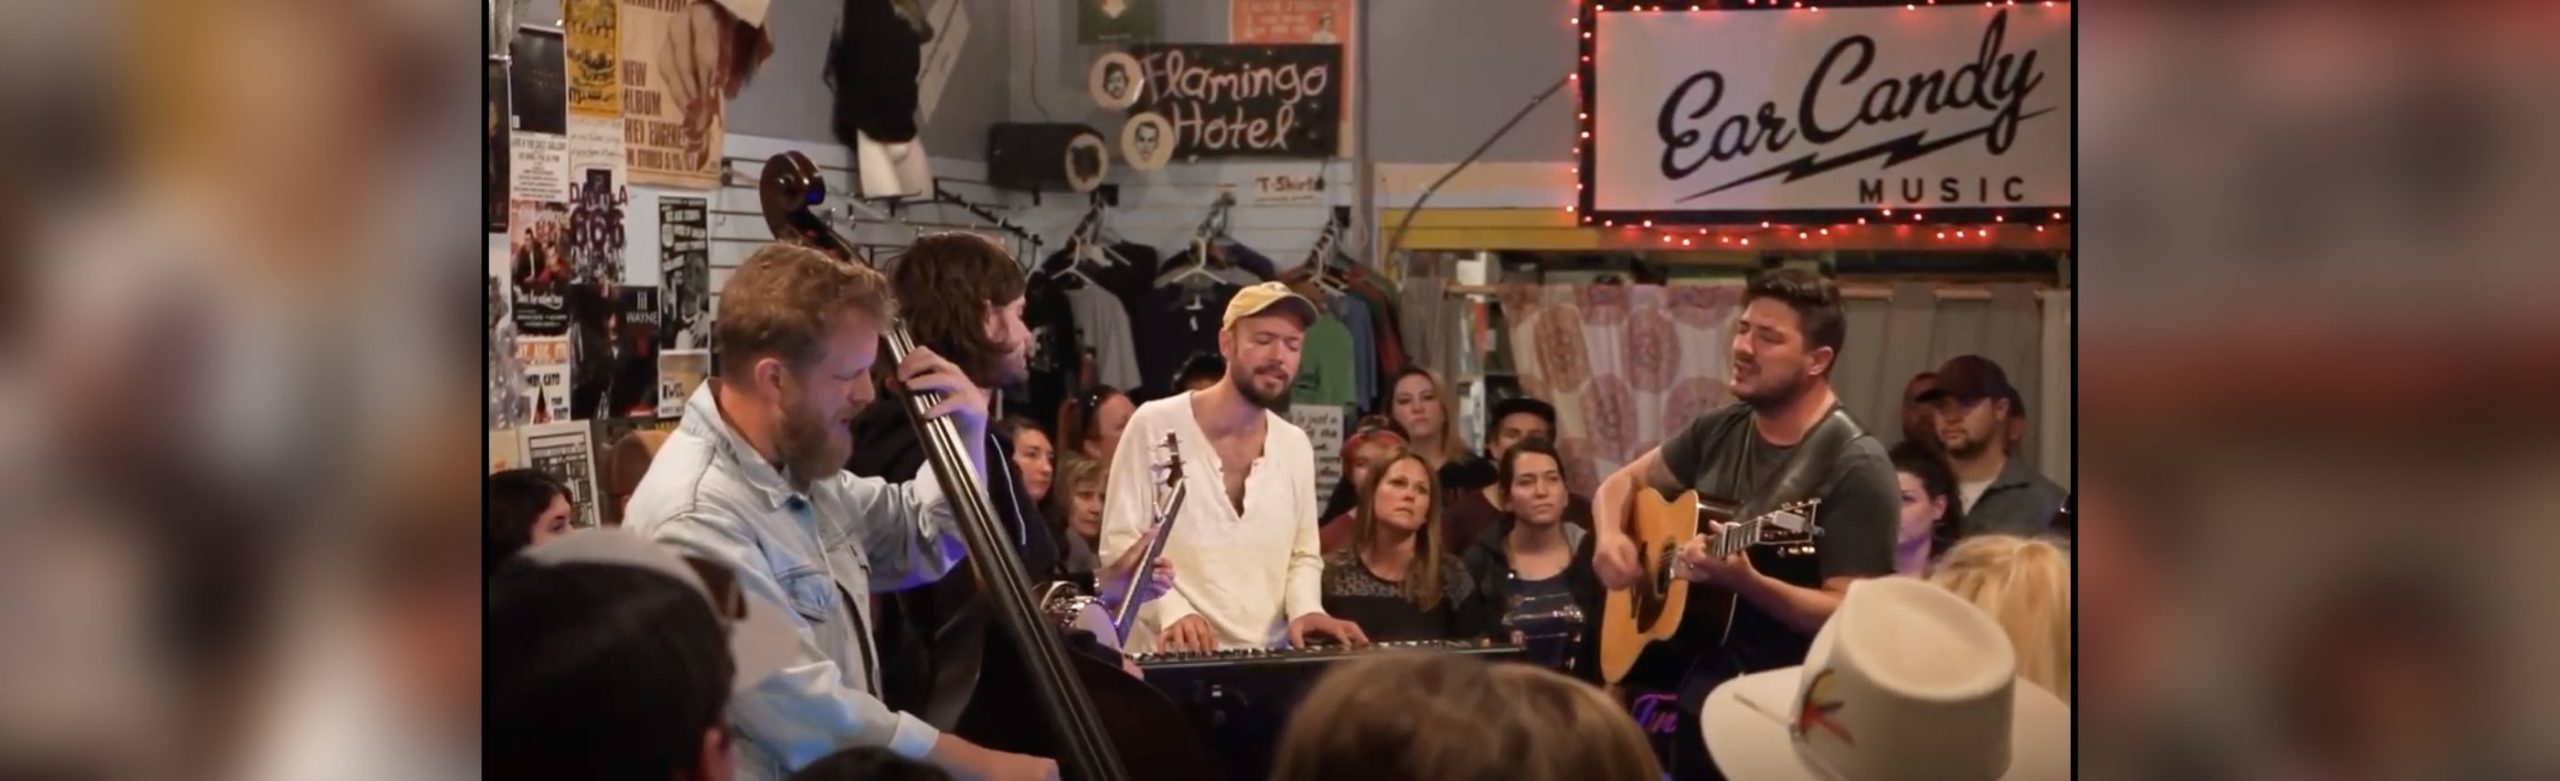 Watch Mumford & Sons Perform at Ear Candy in Missoula Image